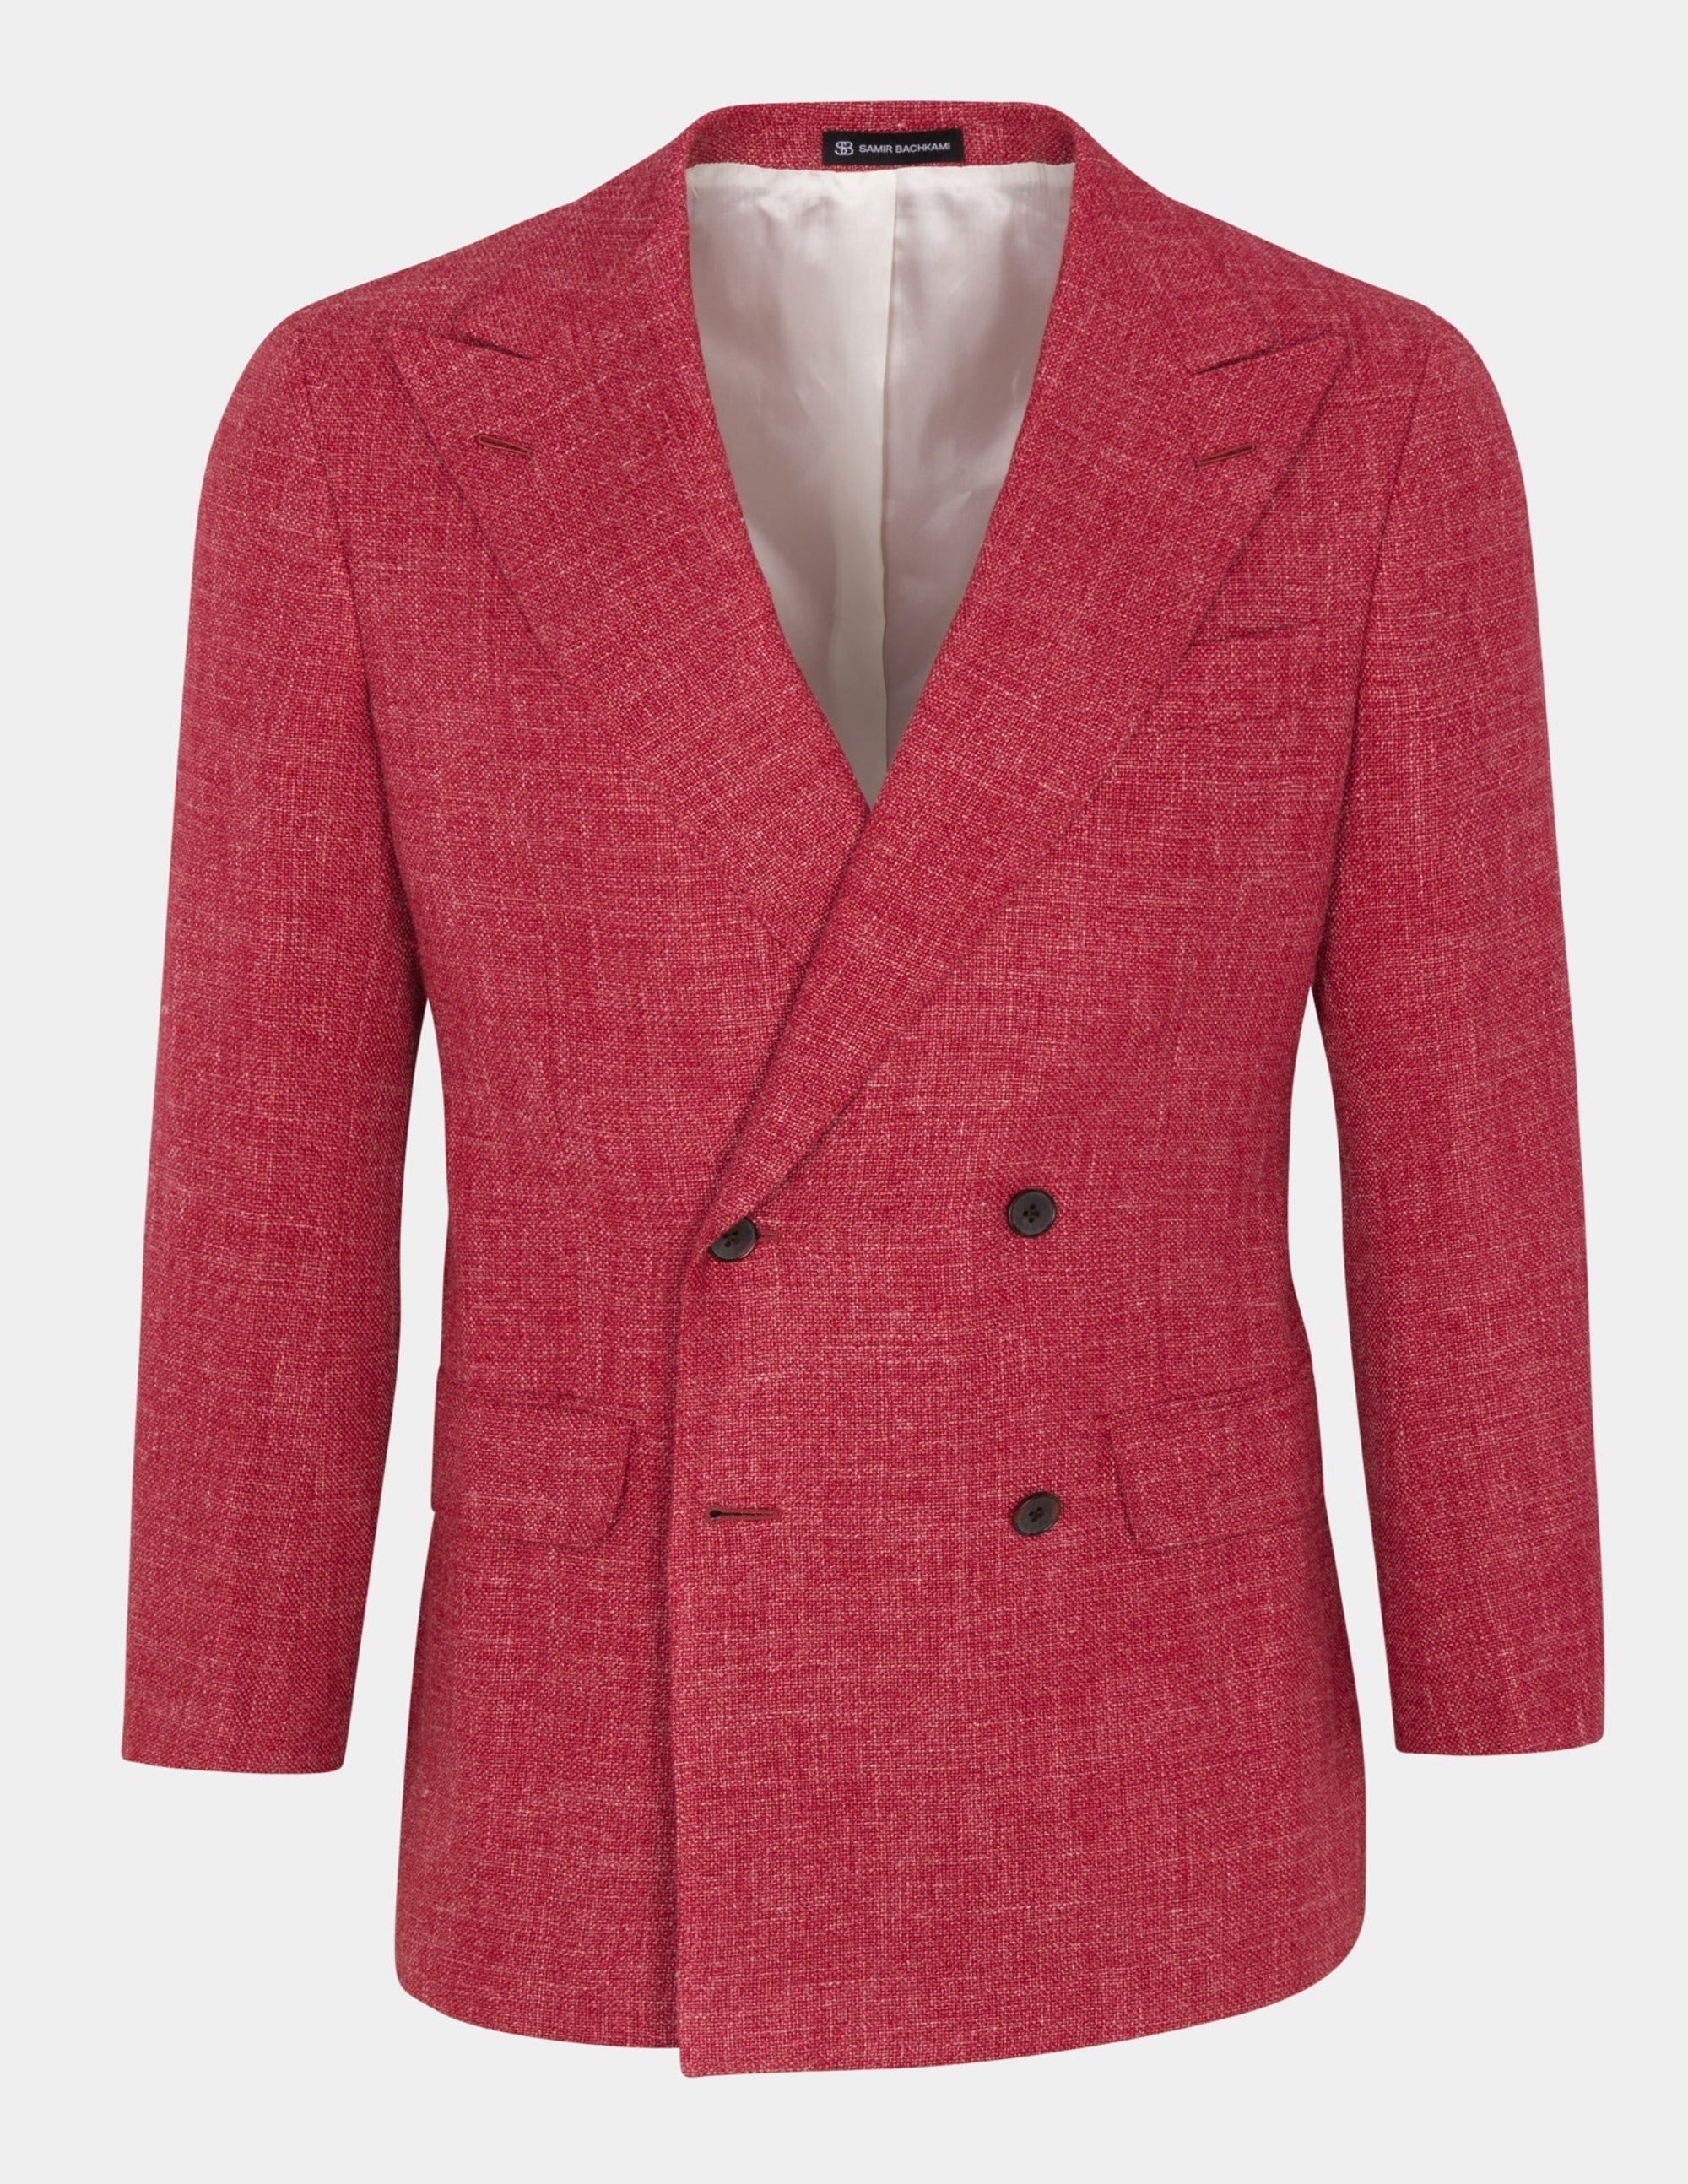 White-Red Double-Breasted Jacket - Samir Bachkami